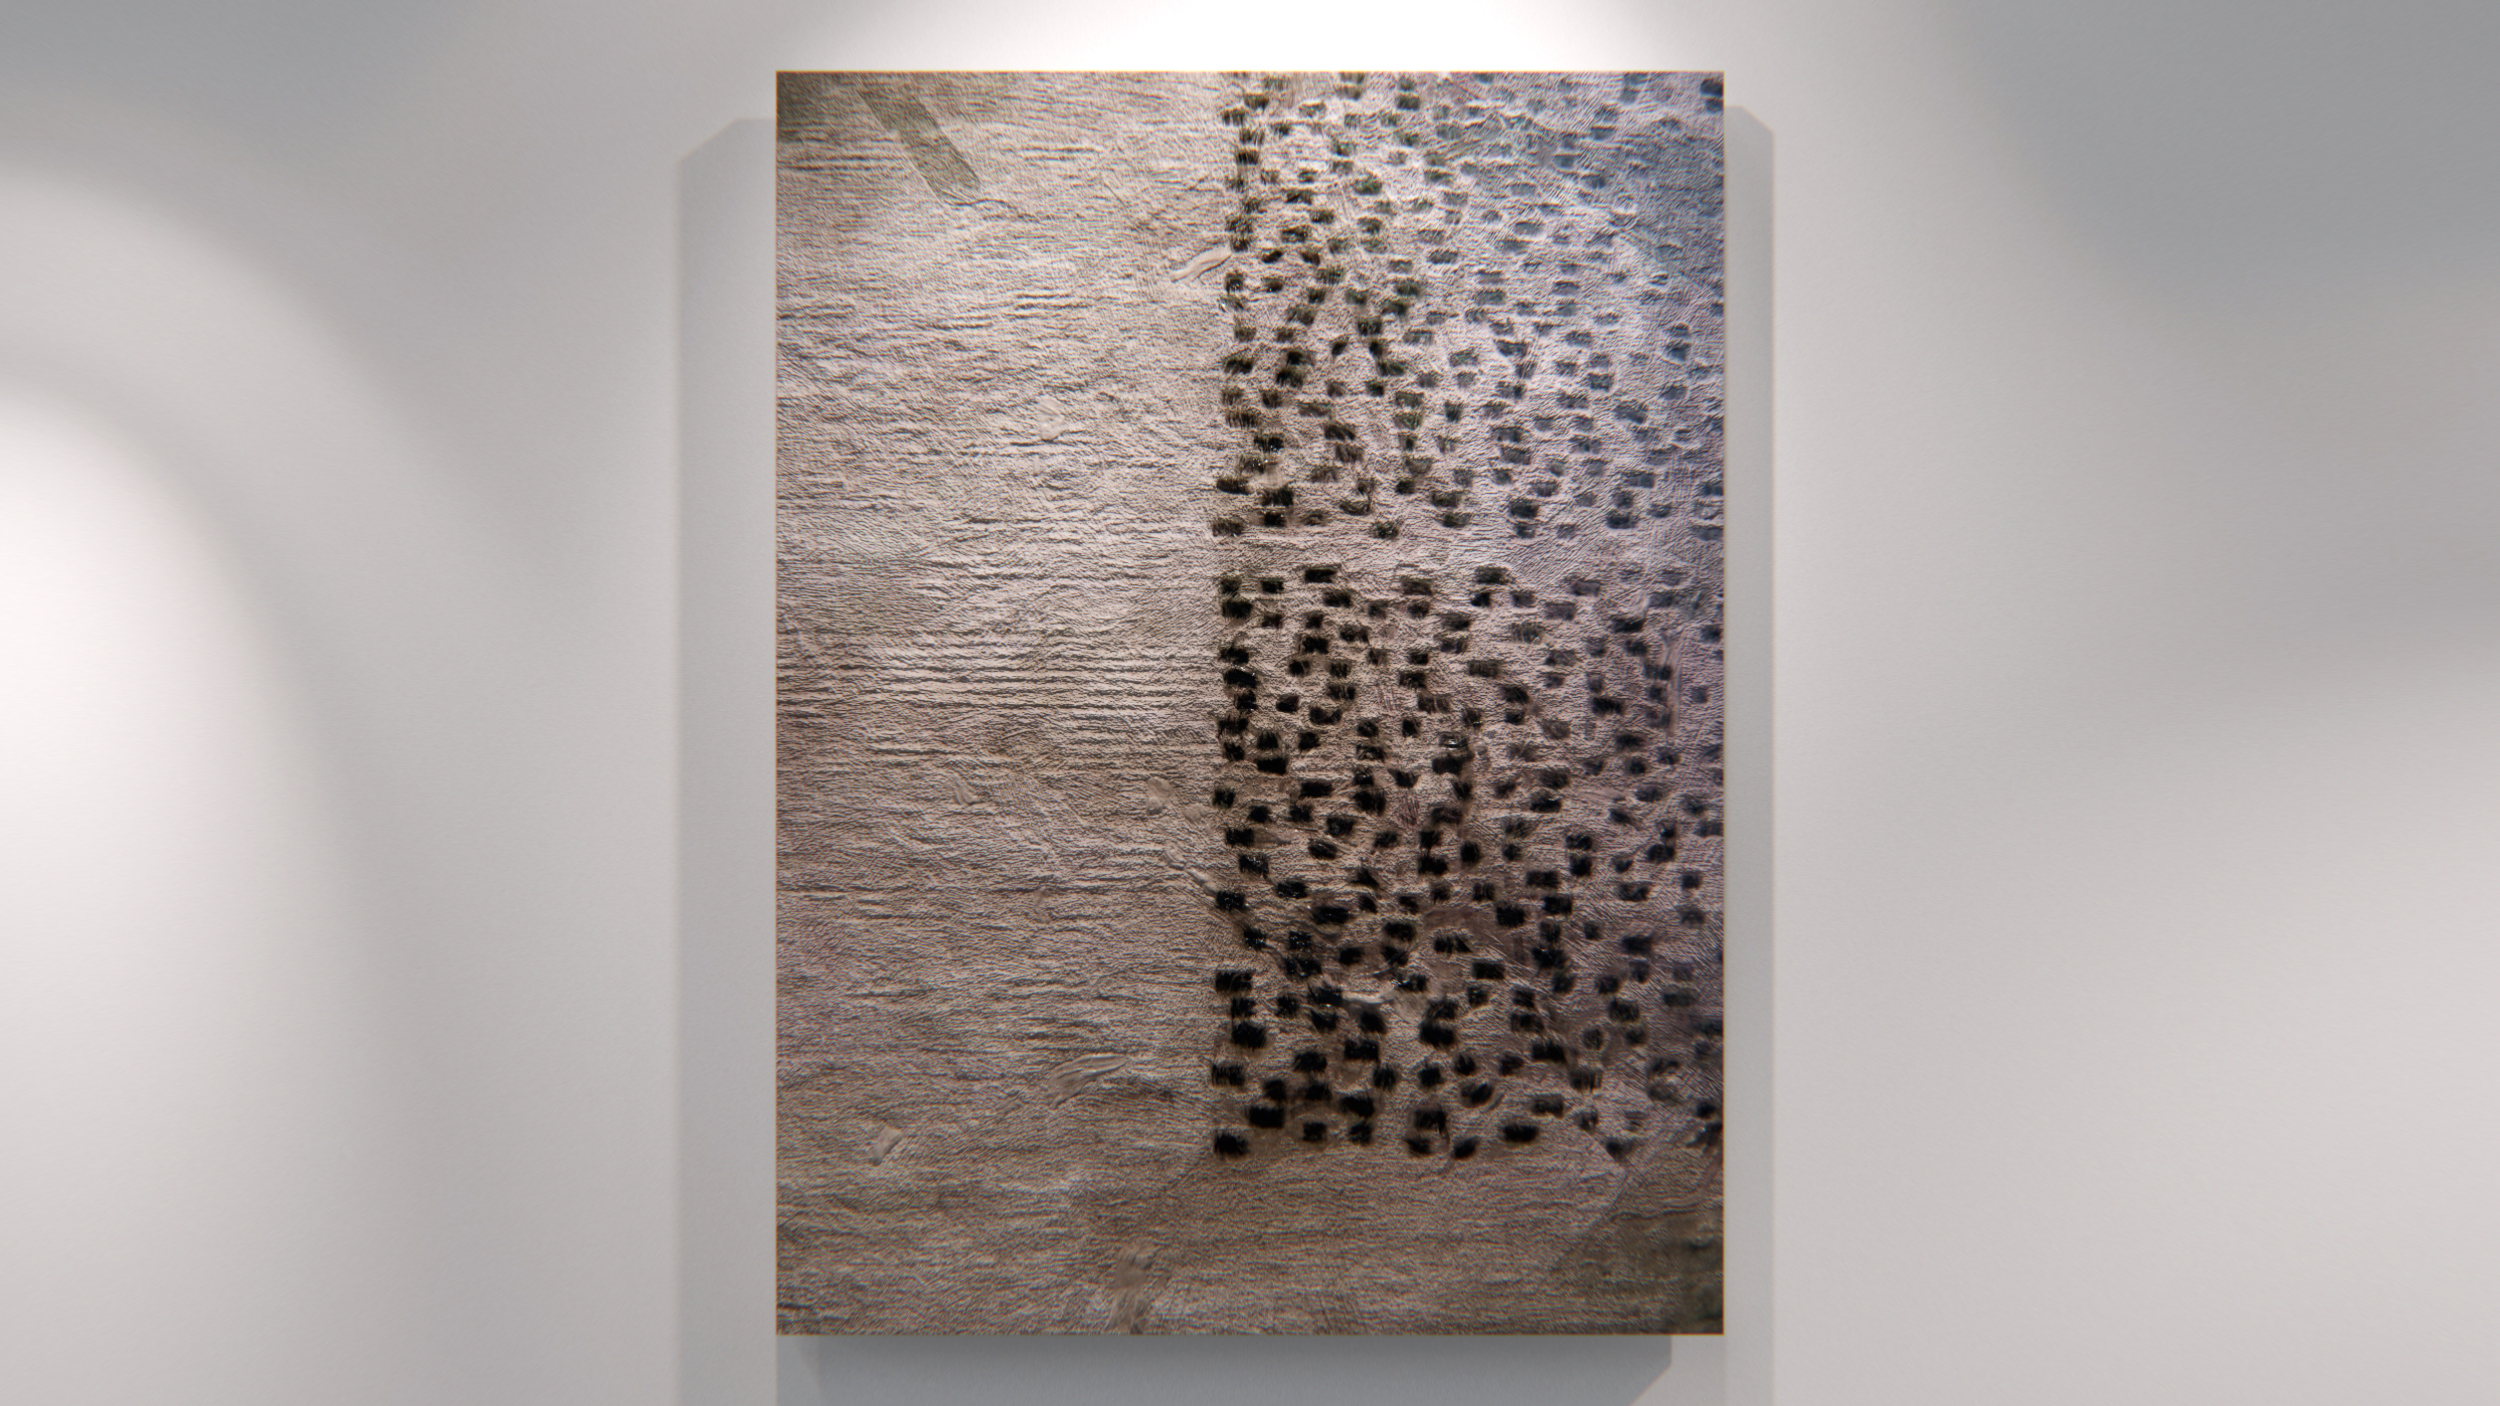  Peter Zumthor 150 х 200 cm  oil, canvas  They say, “the words of wise men are heard in quiet more than the cry of him that ruleth among fools”. This seems to be the approach of Peter Zumthor whose works are smart and simple yet speak volumes.  Zumth